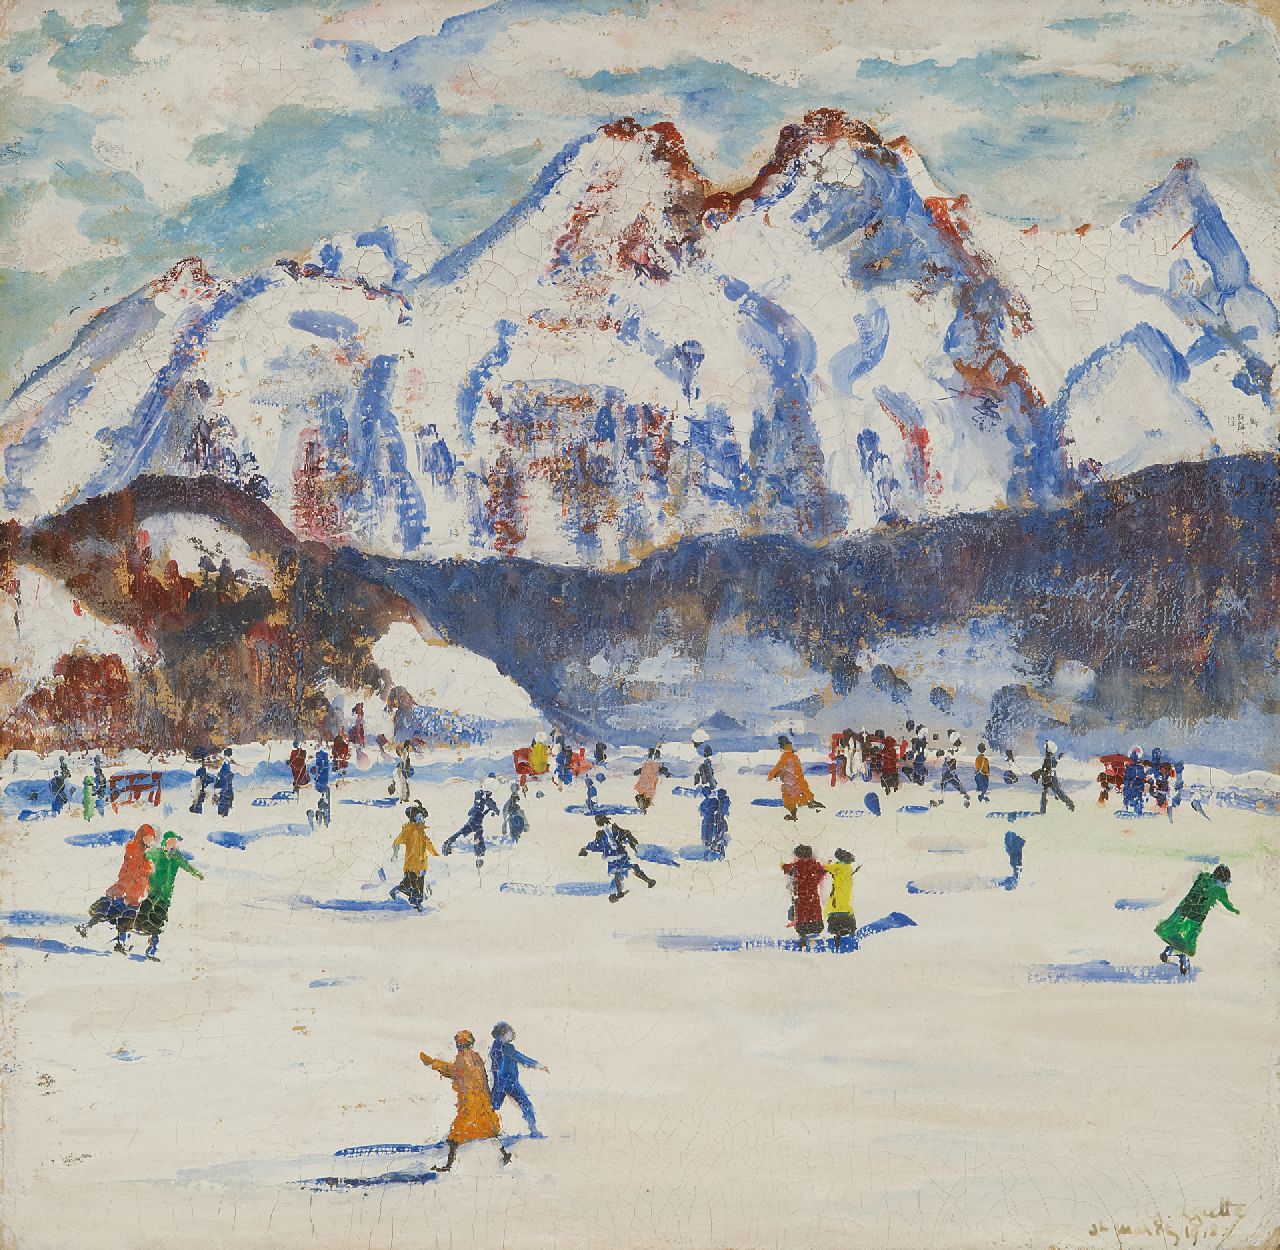 Georgette Agutte | Skating at St. Moritz, gouache on board, 23.5 x 24.3 cm, signed l.r. and dated 'St. Moritz 1918'